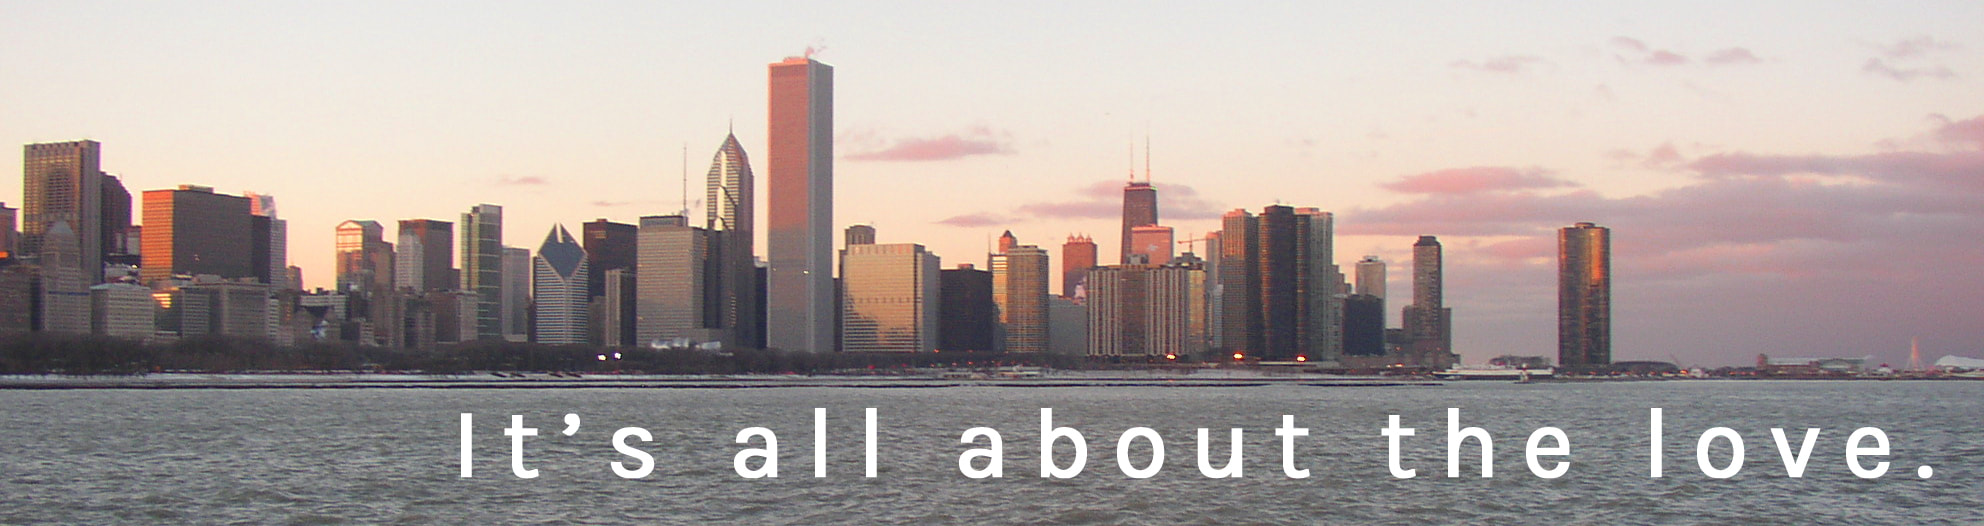 Image ID: A landscape photo of the Downtown Chicago skyline at sunset. In the foreground Lake Michigan is visible, and in the background, the sky is blue-grey and yellow, with pink clouds. In white sans-serif text, the bottom right corner of the image reads 